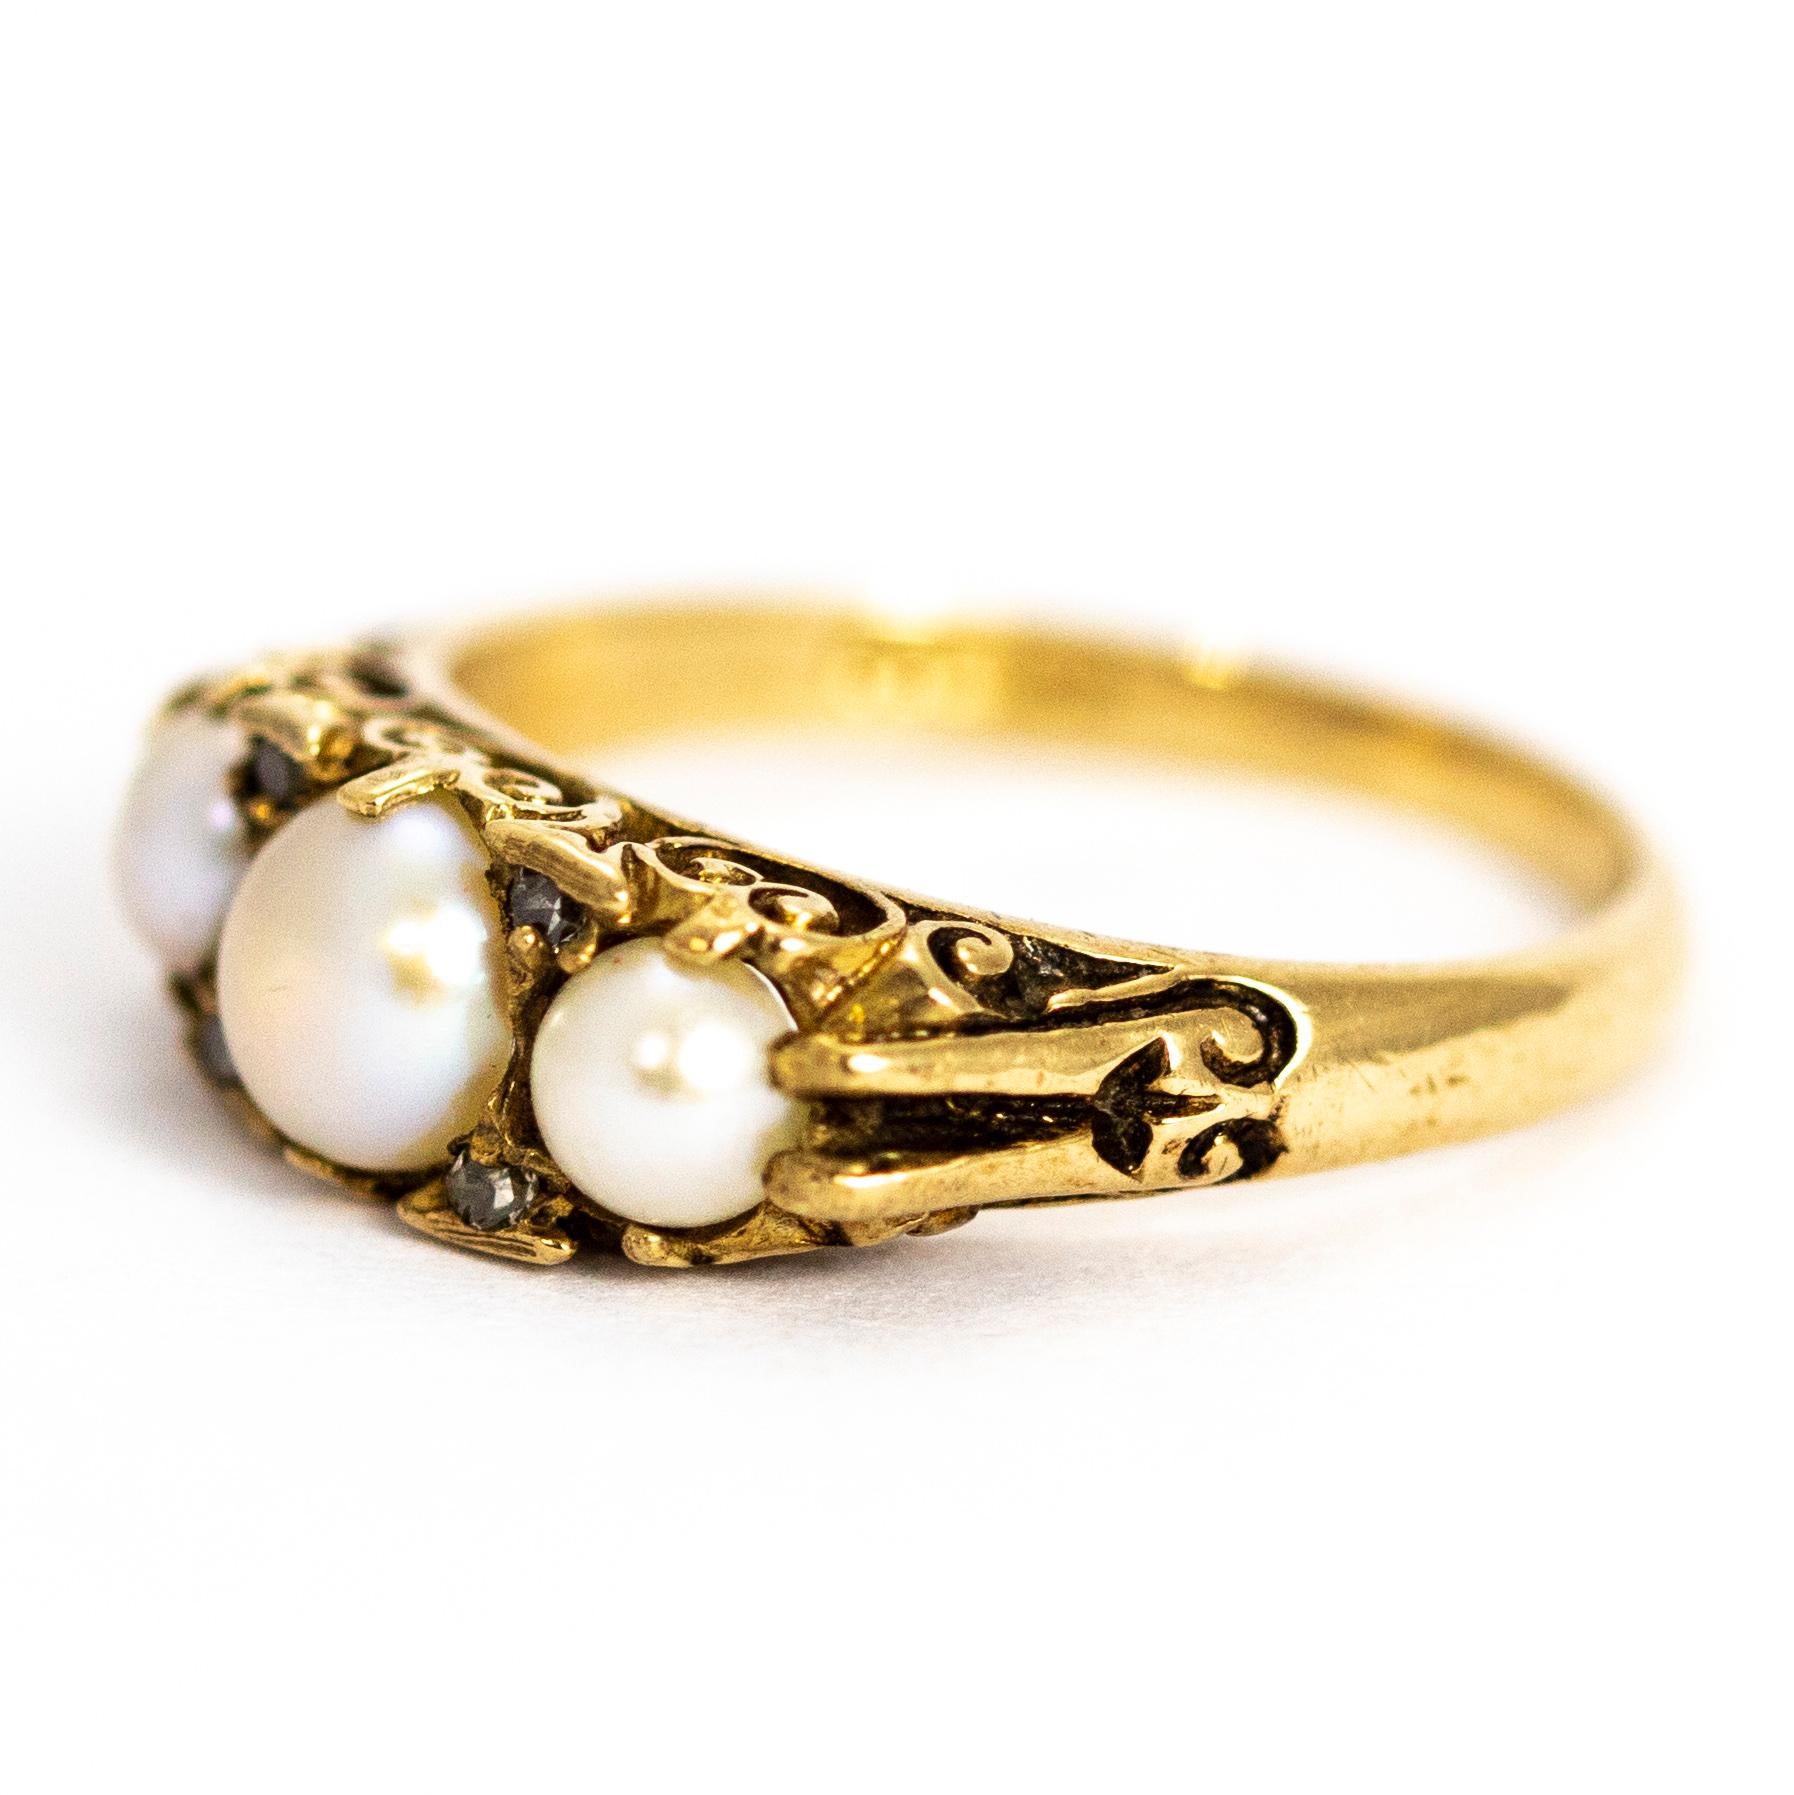 A wonderful vintage three stone-ring set with beautiful graduated pearls with diamond points in between. All set in an ornate gallery. Modelled in 9 carat yellow gold. Fully hallmarked 1979 Birmingham, England.

Ring Size: UK K 1/2, US 6